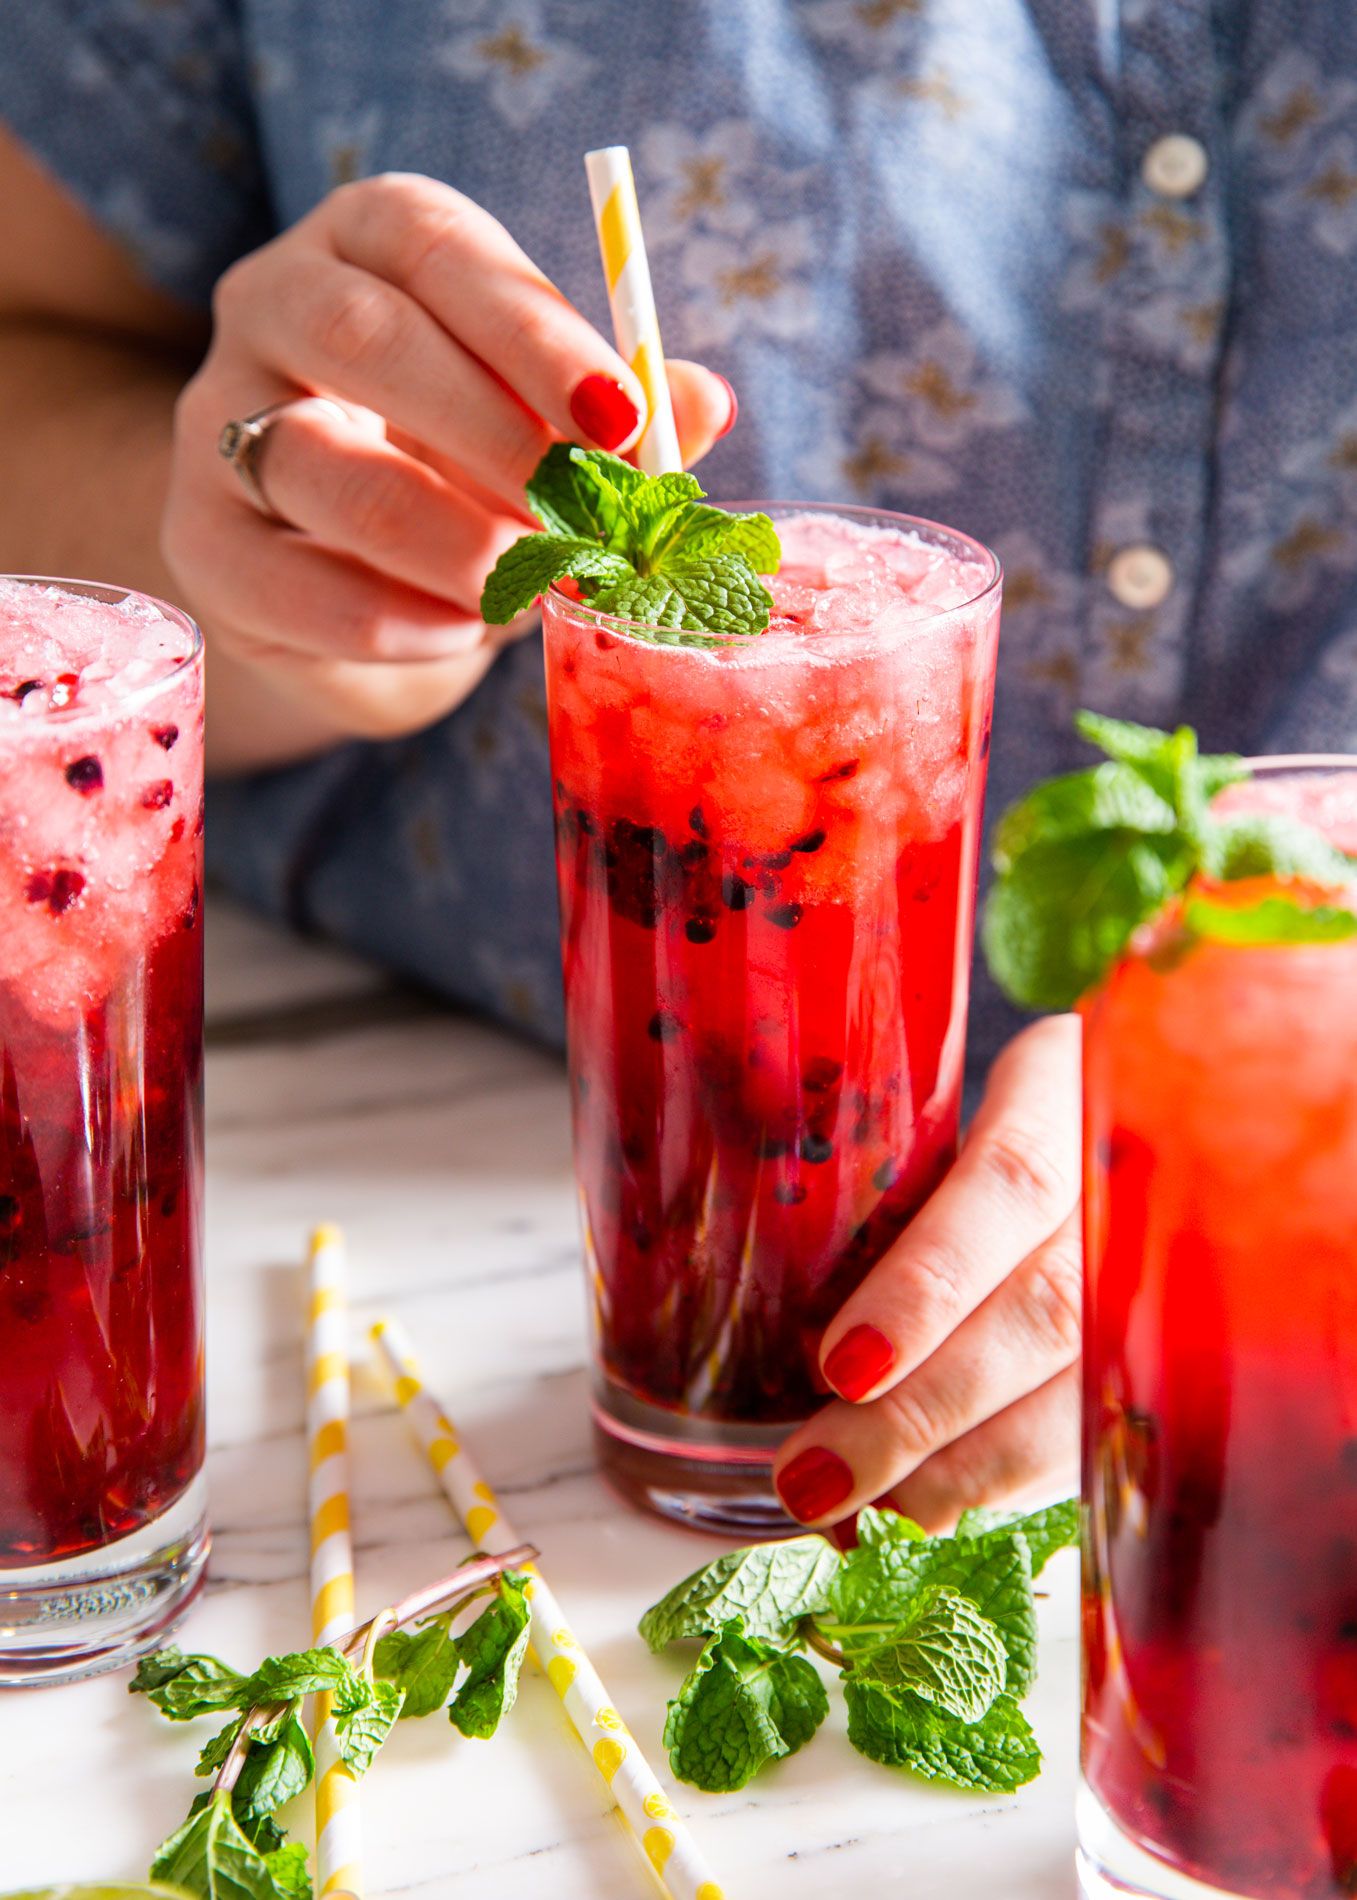 30 Best Mocktail Recipes - Non-Alcoholic Mixed Drinks Ideas